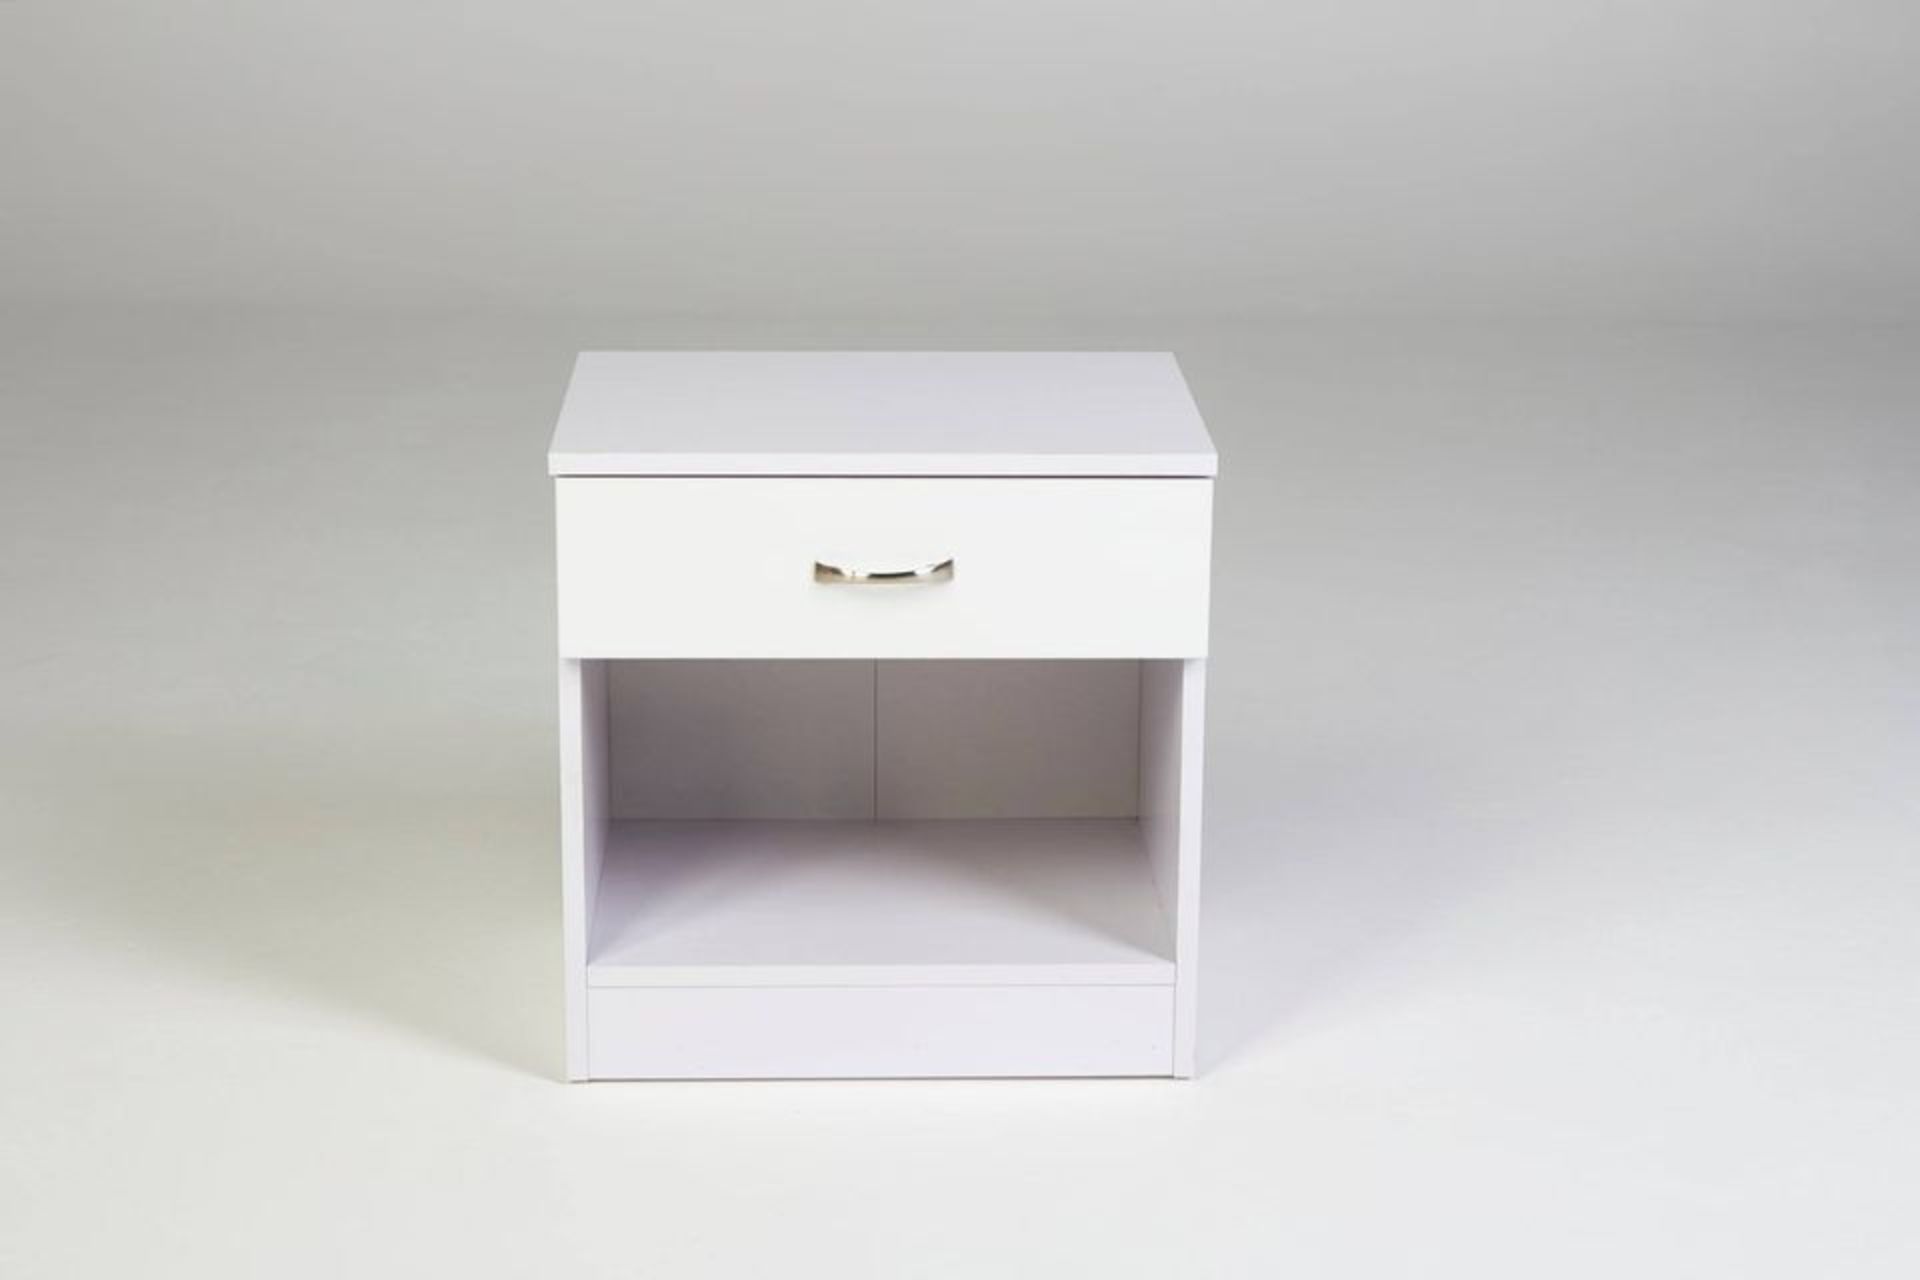 PAIR OF WHITE SINGLE DRAWER BEDSIDES WITH HIGH GLOSS DRAWER FRONTS - Image 3 of 4